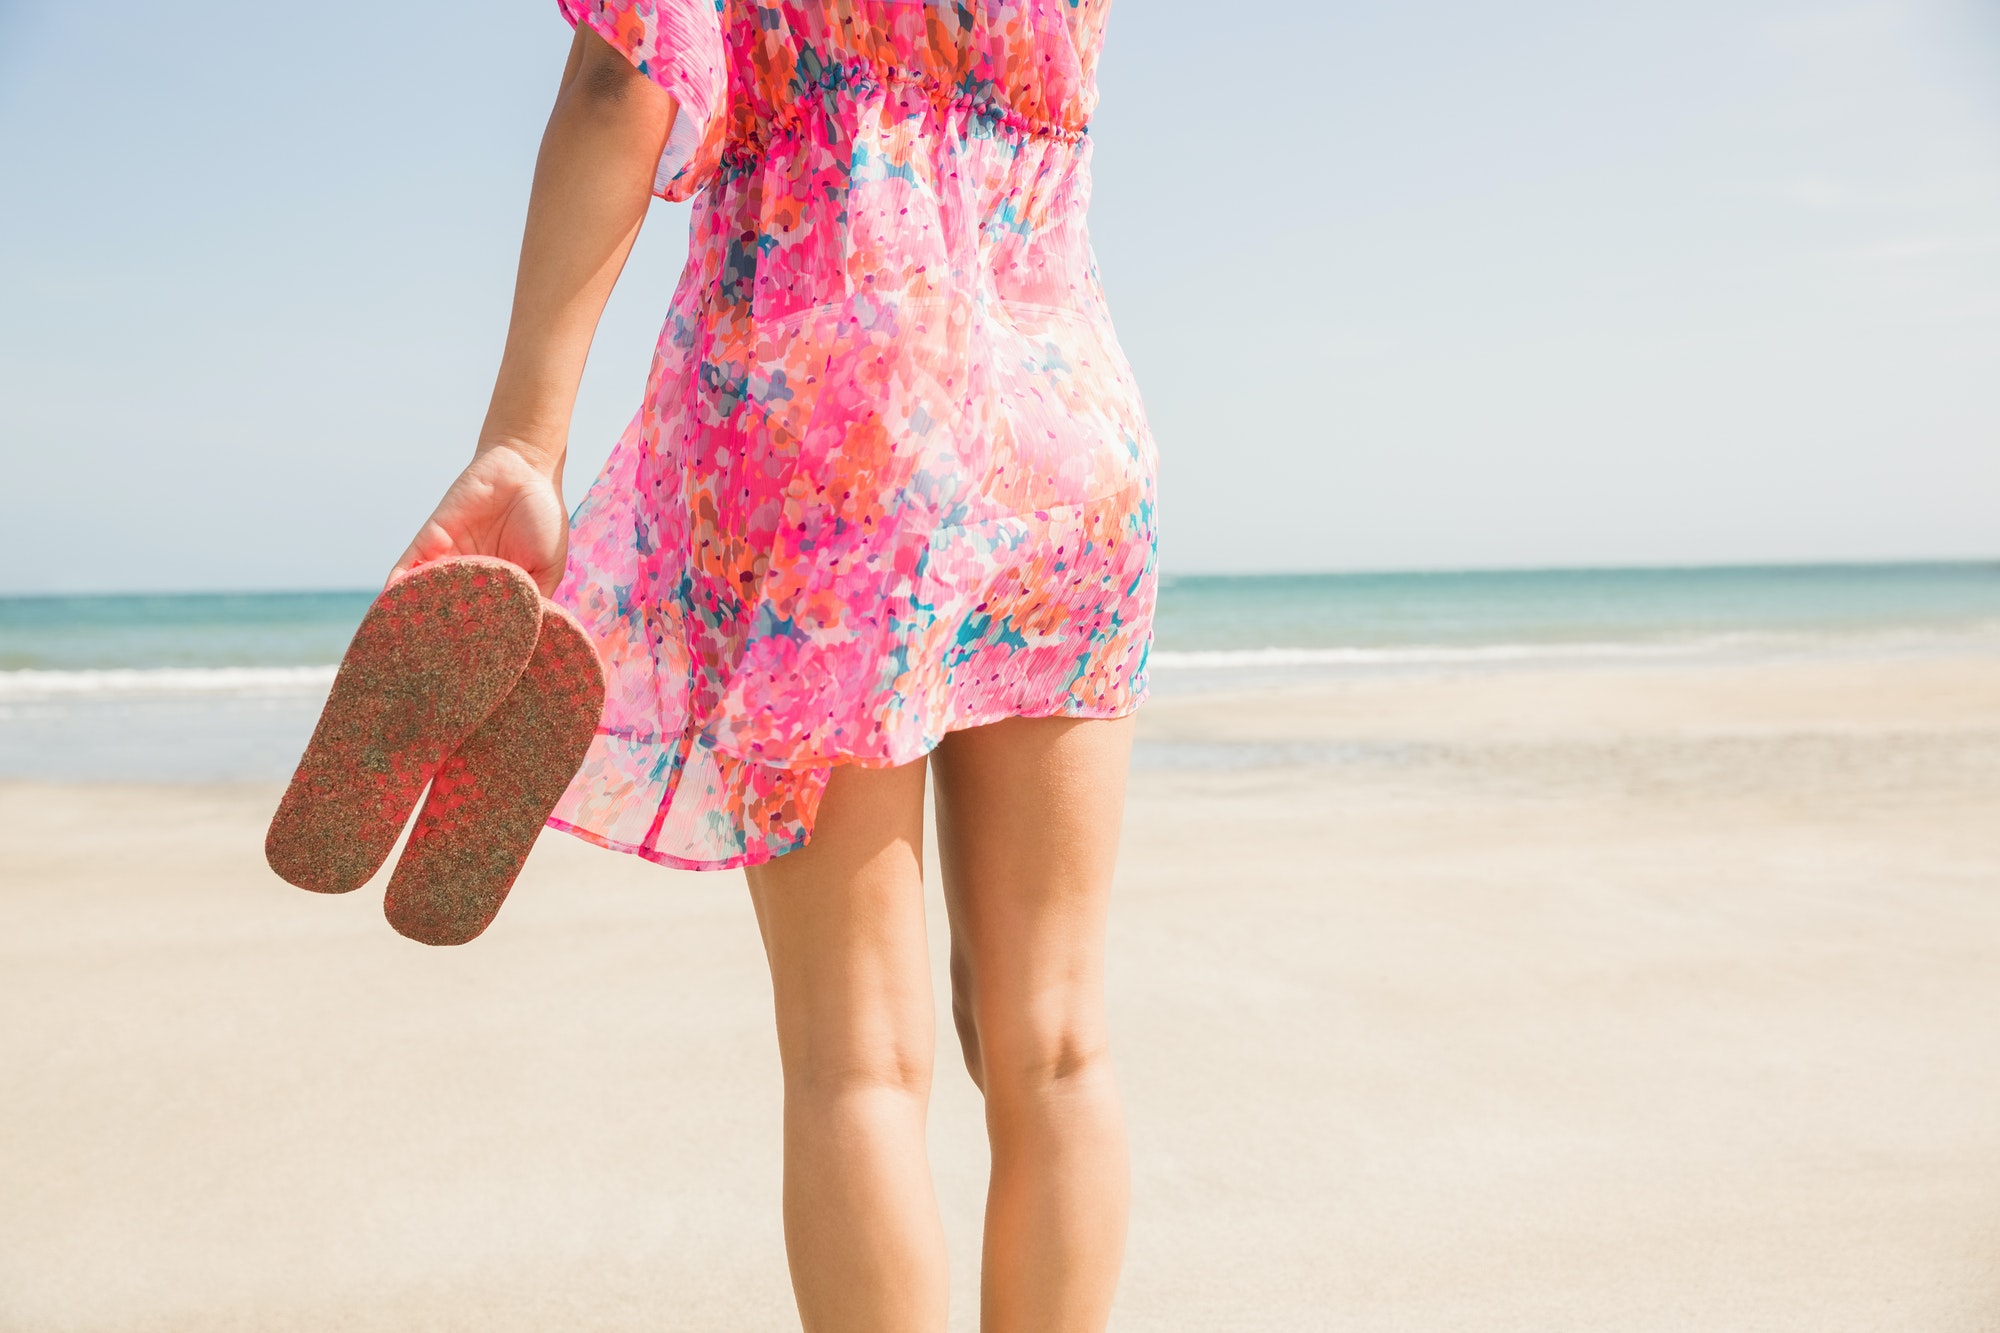 Stylish woman standing on the sand at the beach